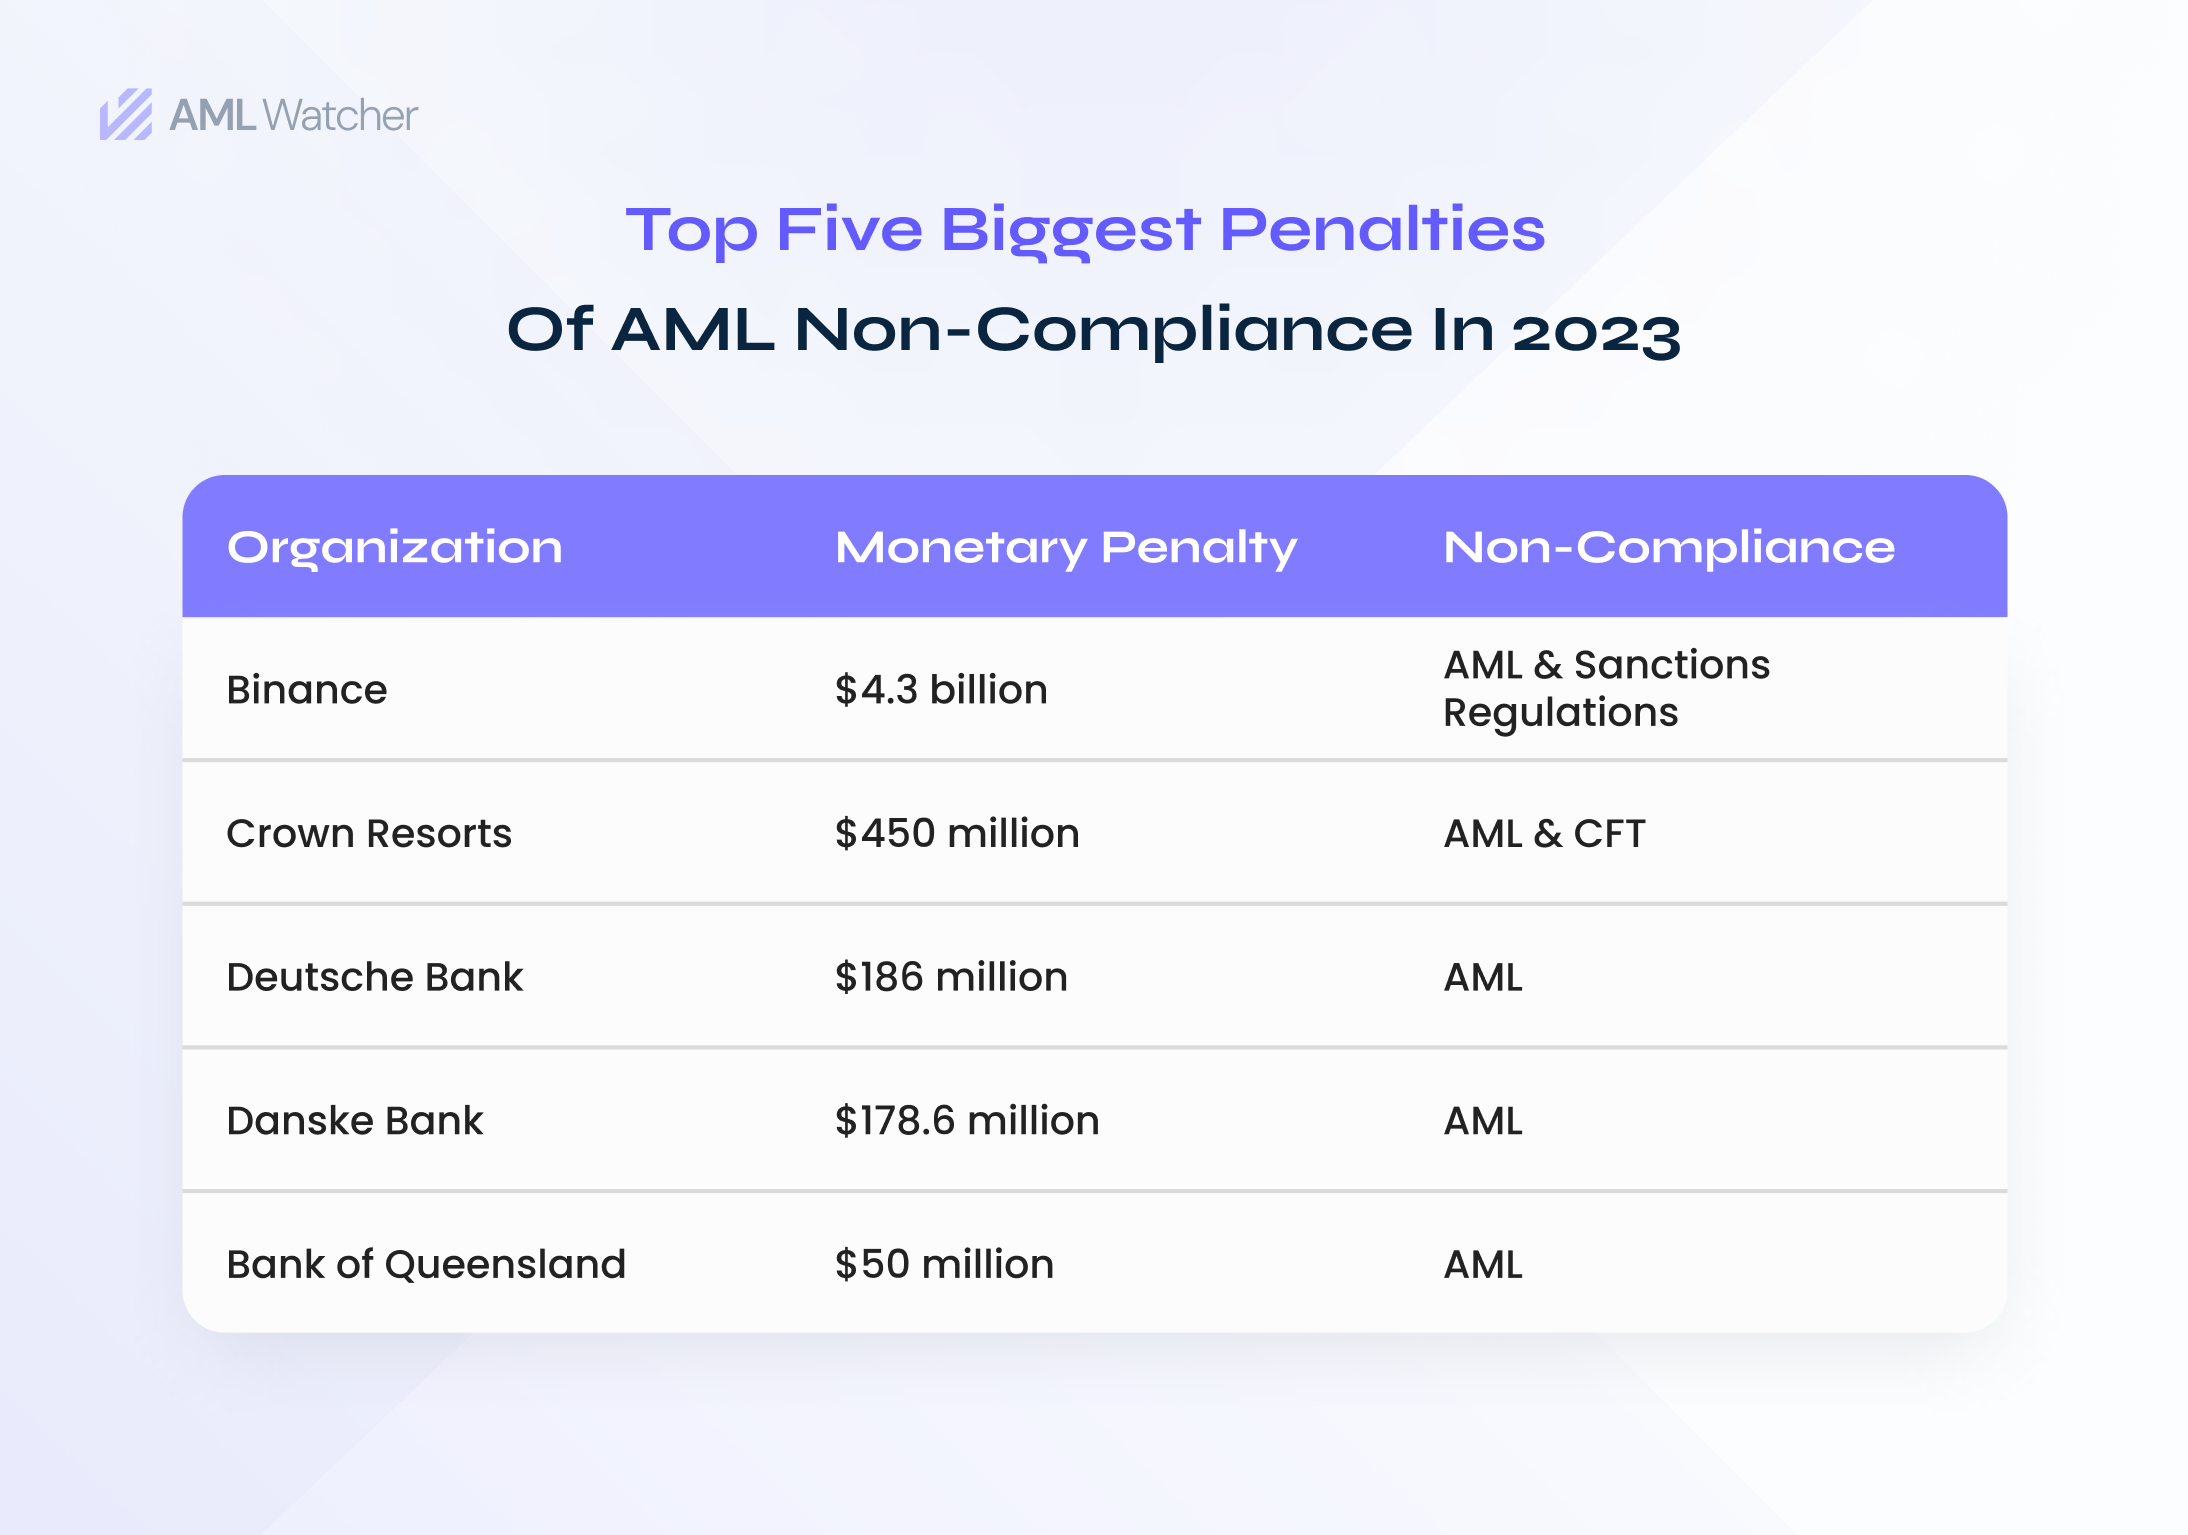 A brief overview of AML non-compliance fines imposed on organizations in the year 2023.